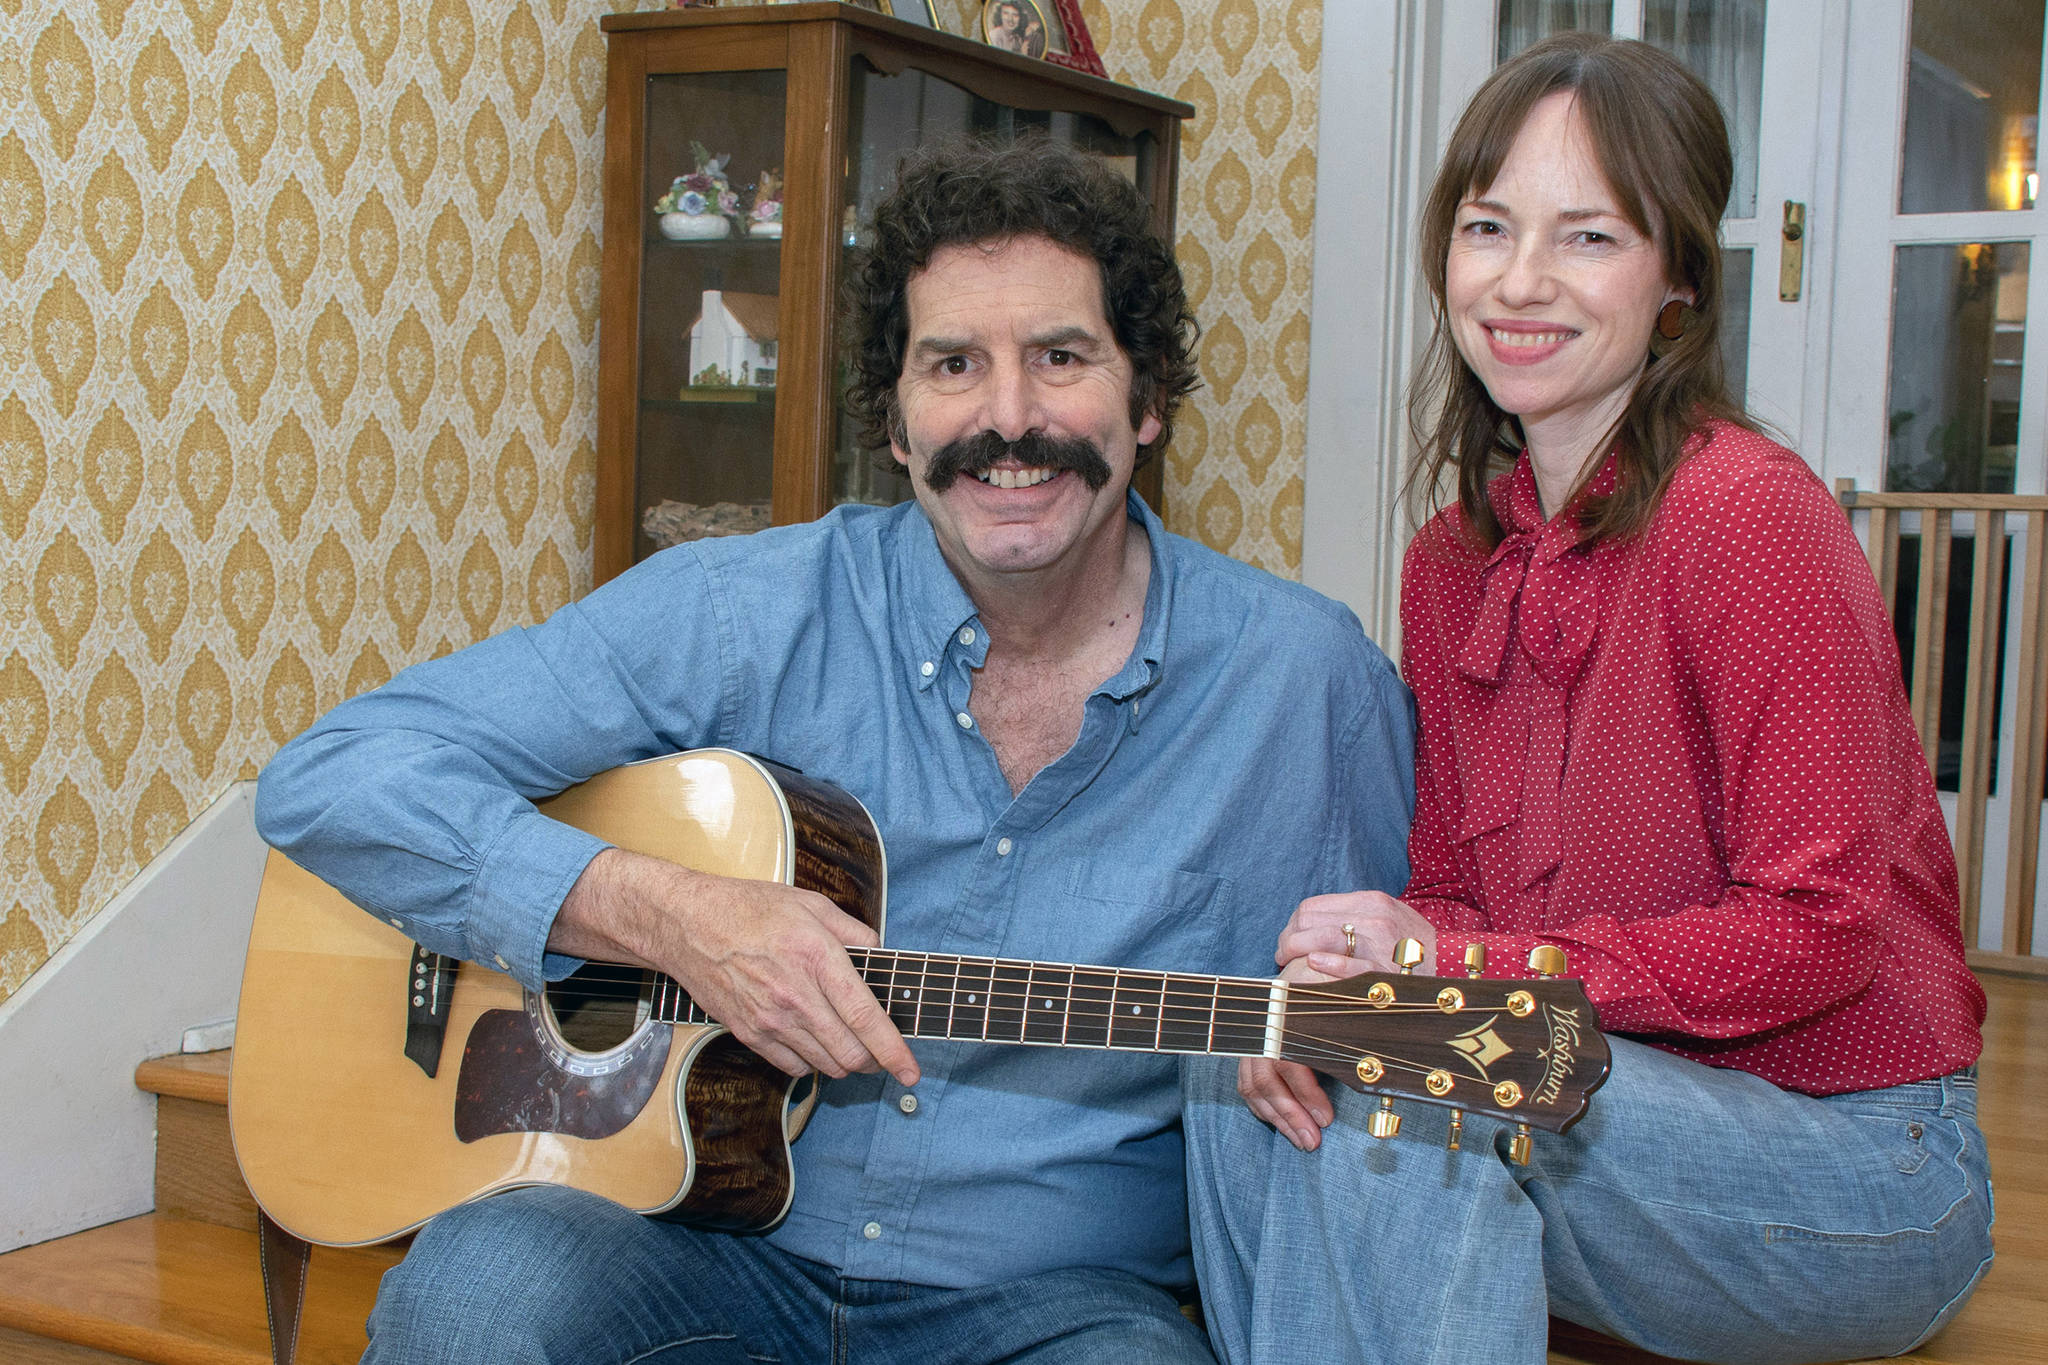 John Clough (Jim Croce) and Summer Koester (Ingrid Croce) will star as the folk-singing couple at the center of an upcoming original production. (Courtesy Photo | John Clough)